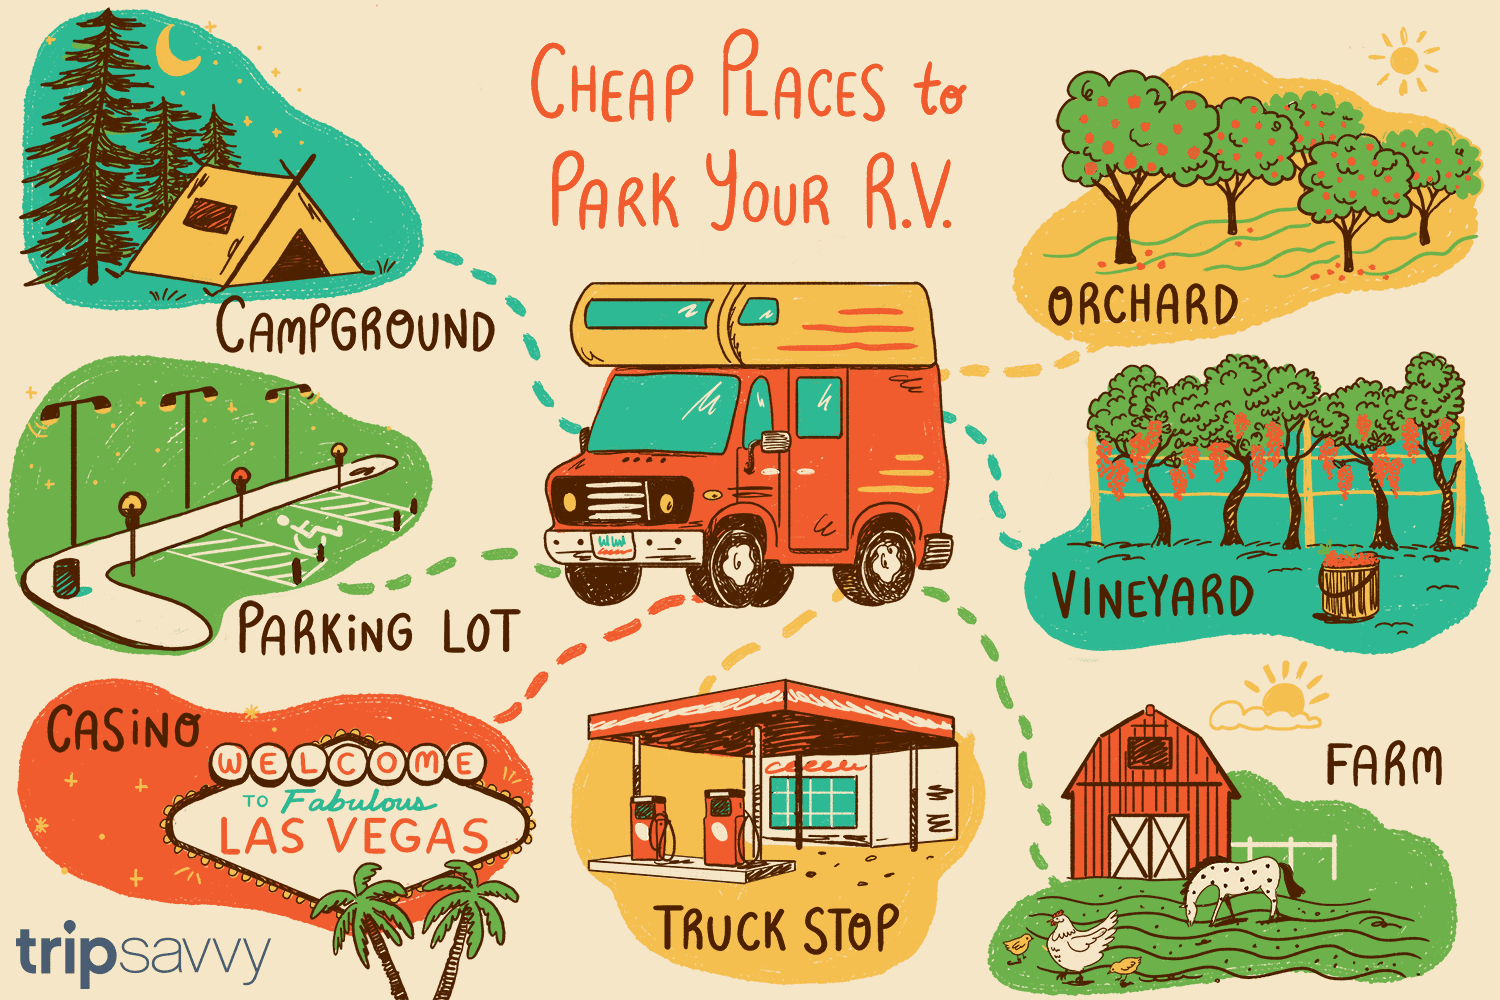 Where to Park Your RV for Free or Cheap